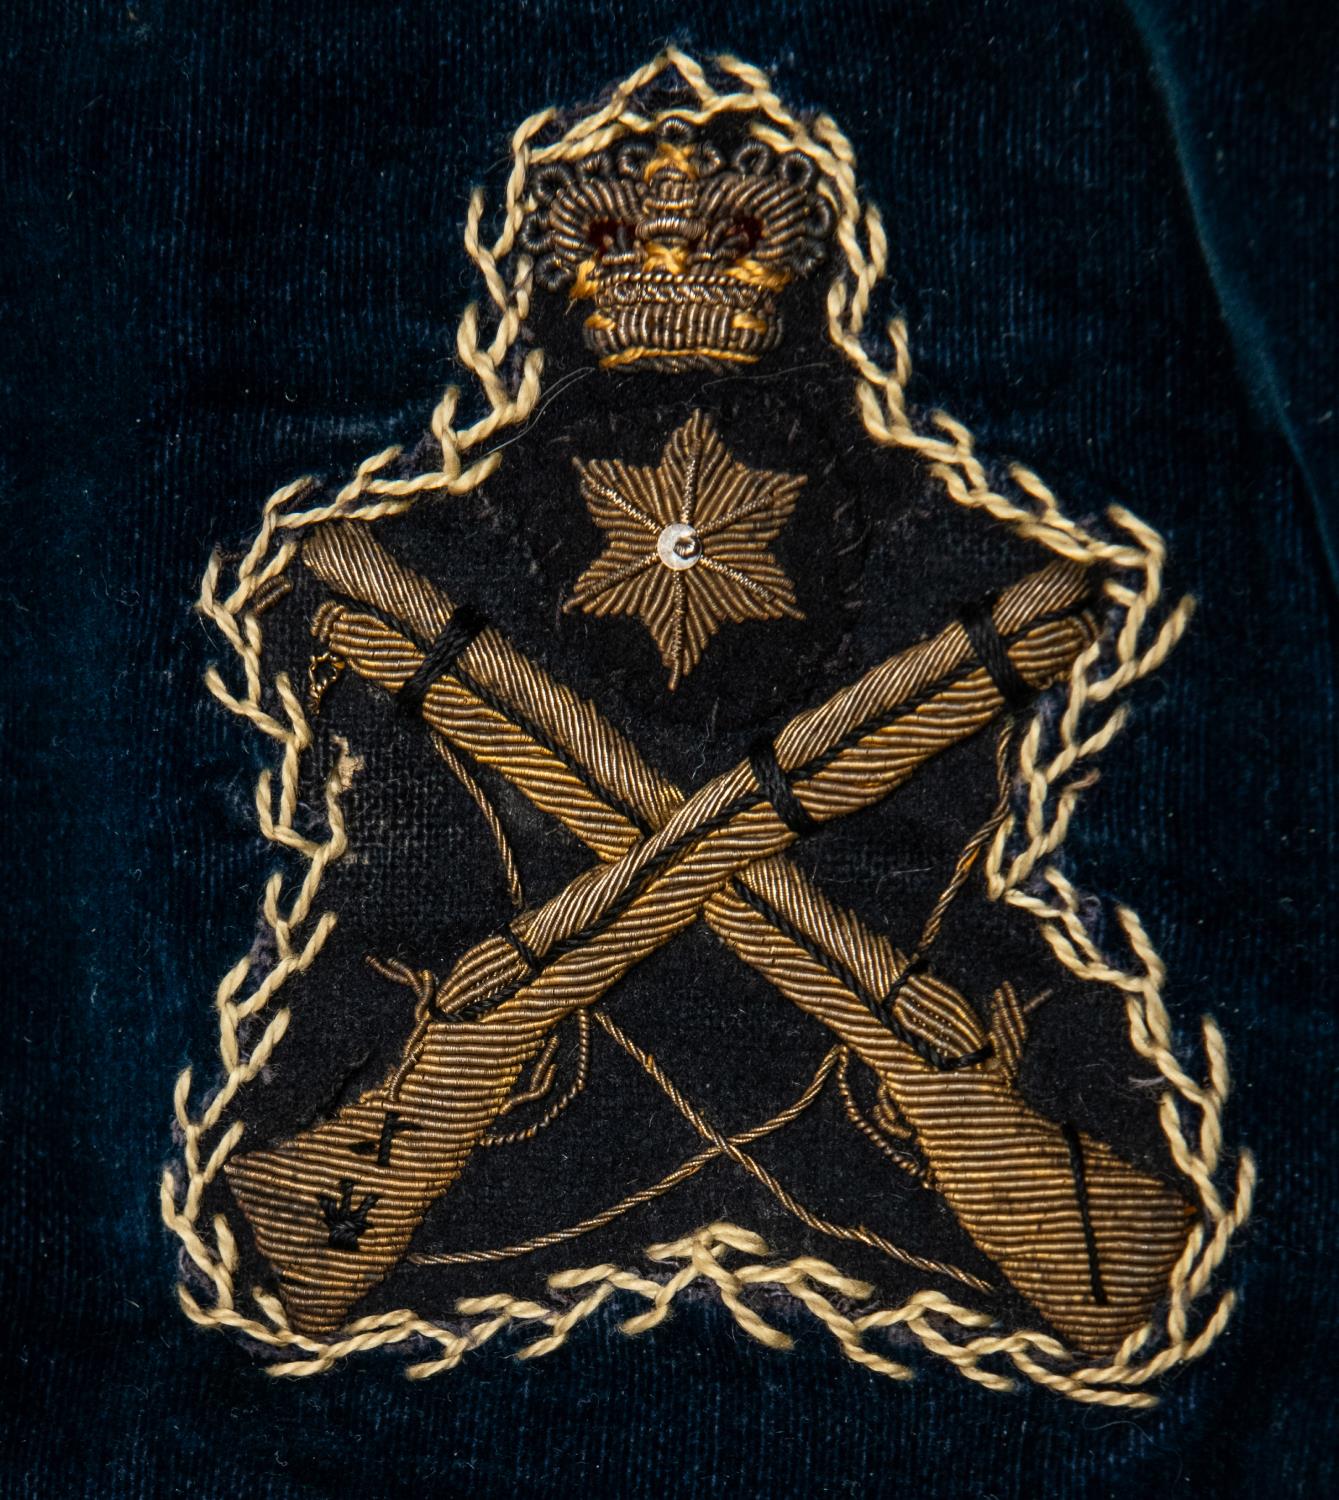 43 mostly Naval Victorian/Edwardian trade and proficiency bullion embroidered arm badges, - Image 3 of 3